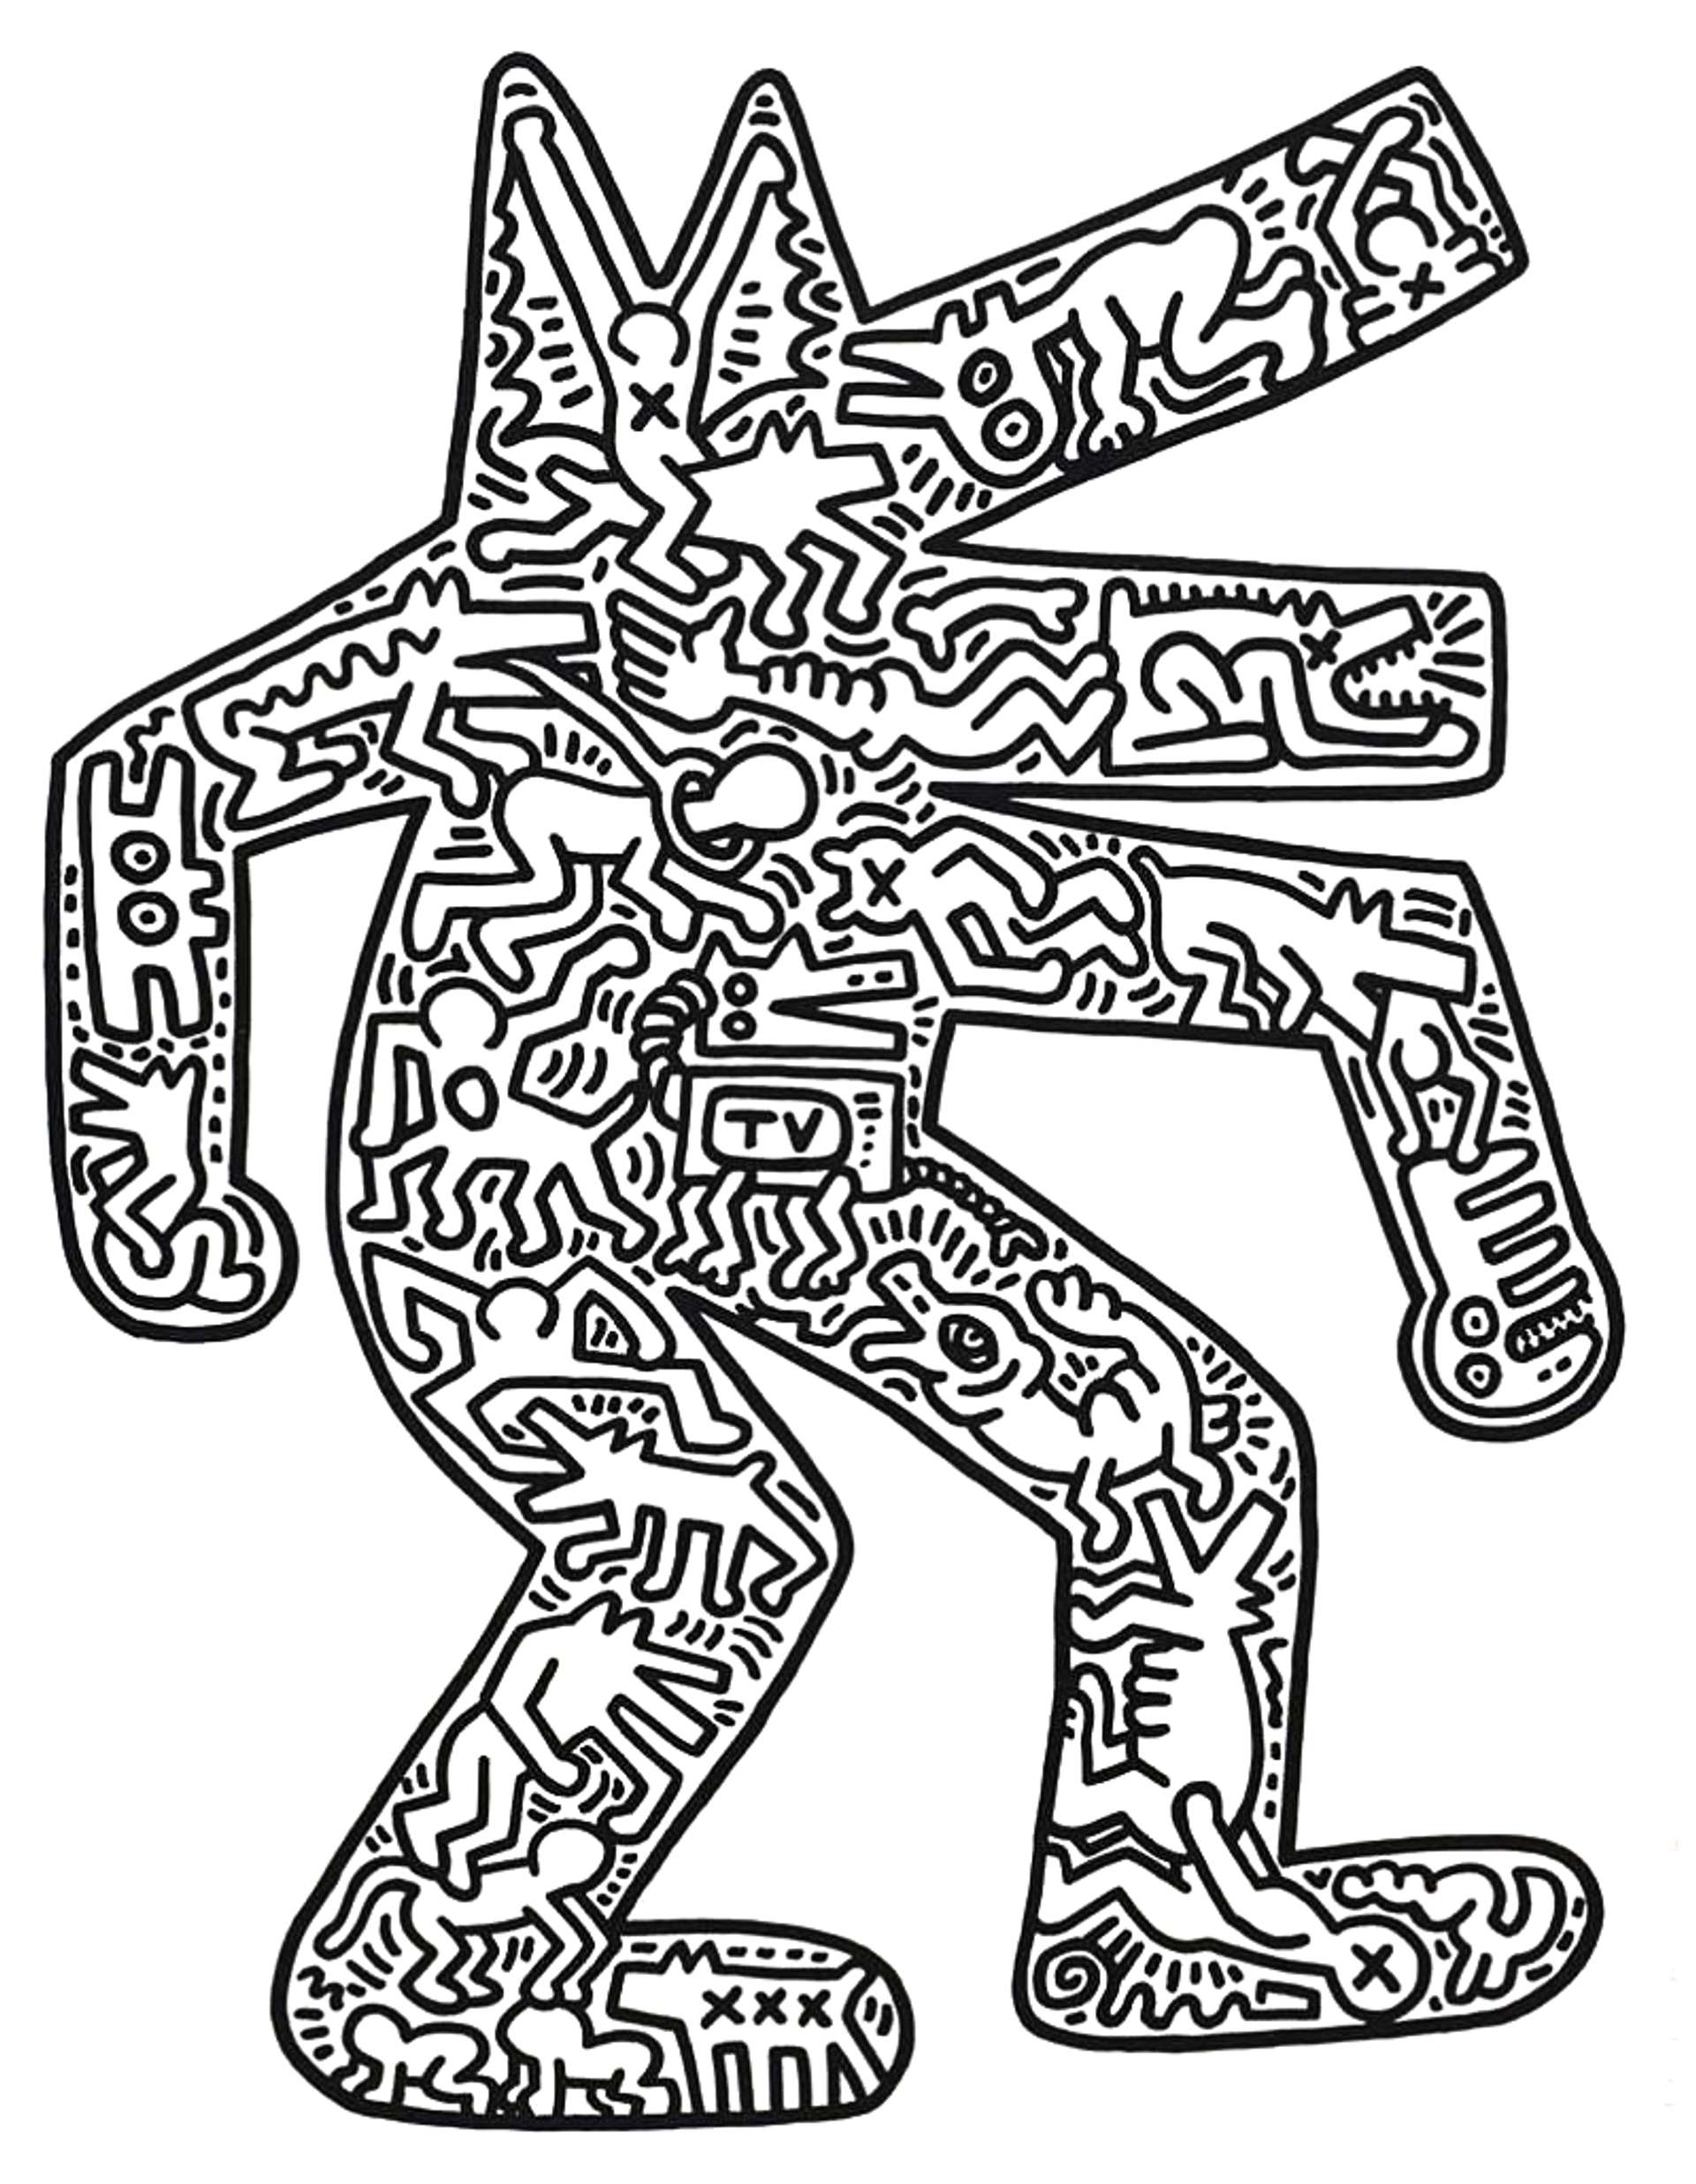 Keith Haring Art for Adults coloring page - Download, Print or